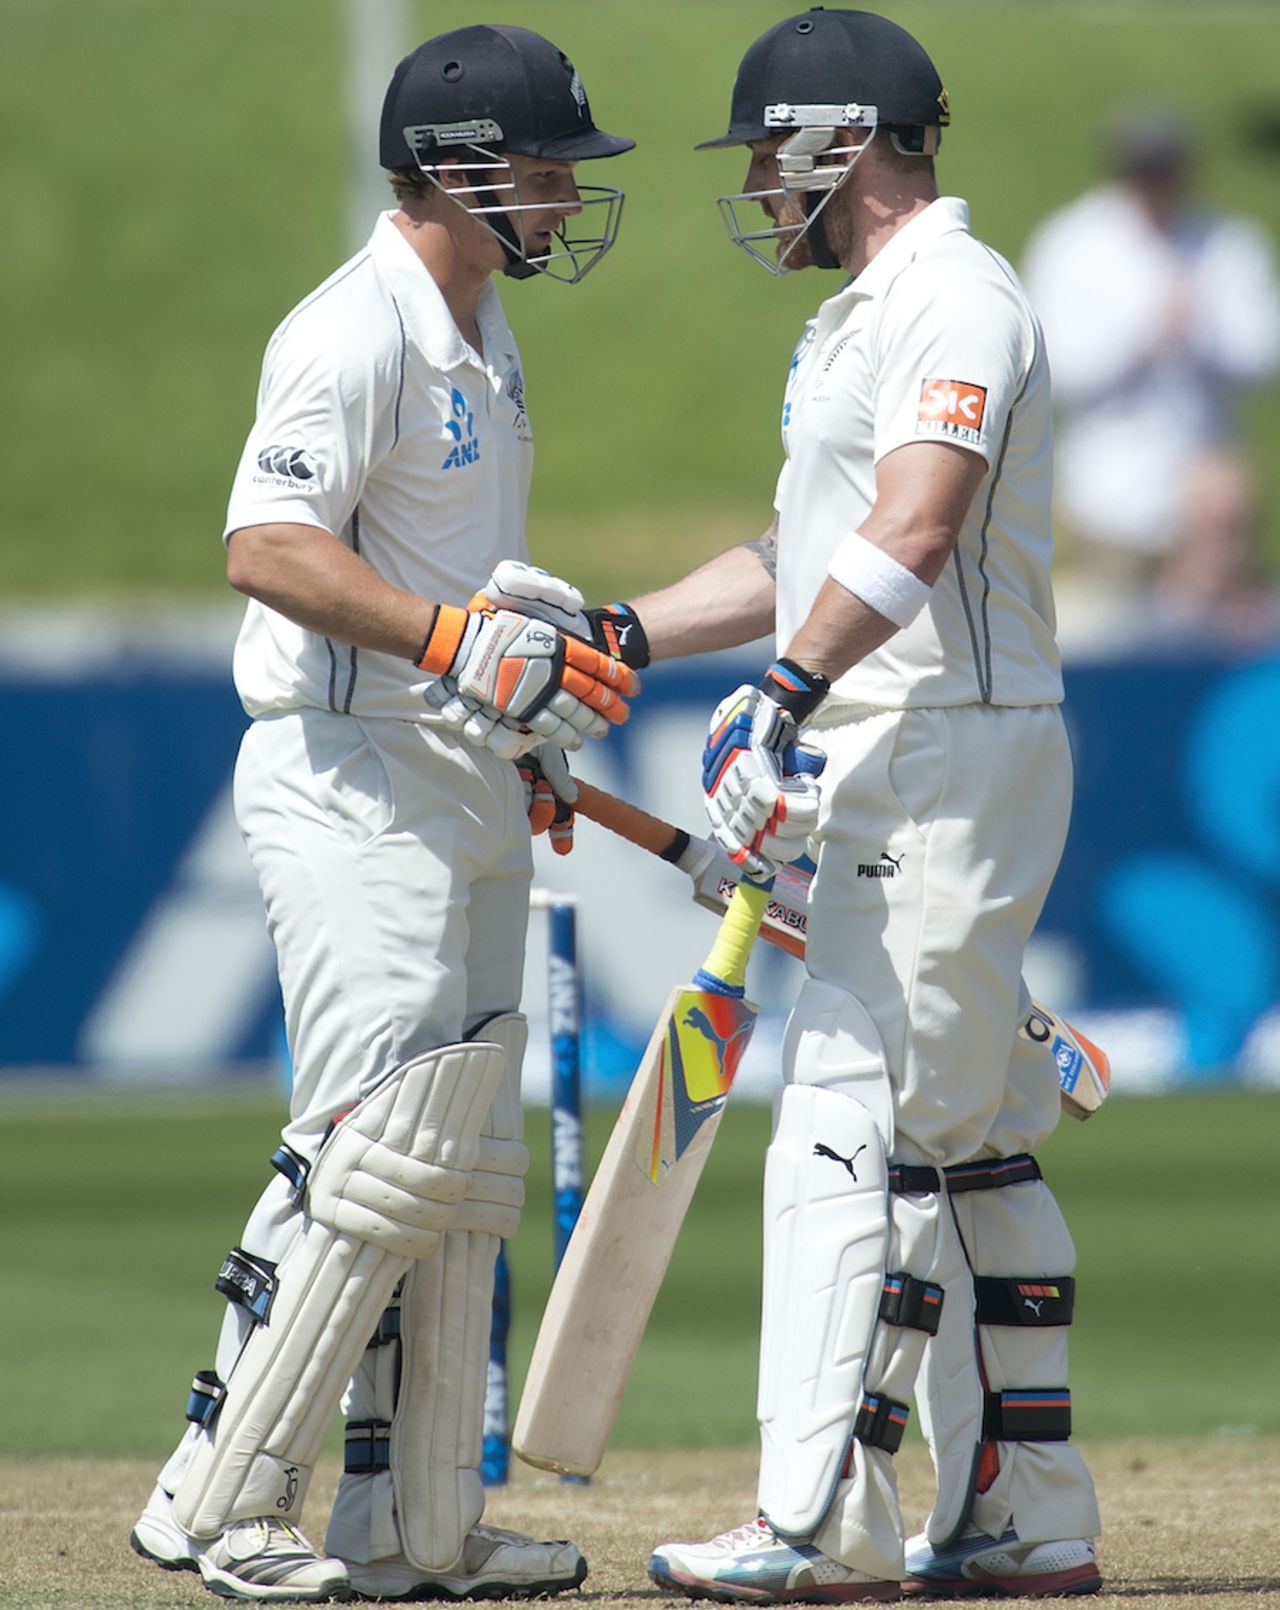 Brendon McCullum sways away from a bouncer, New Zealand v India, 2nd Test, 4th day, Wellington, February 17, 2014